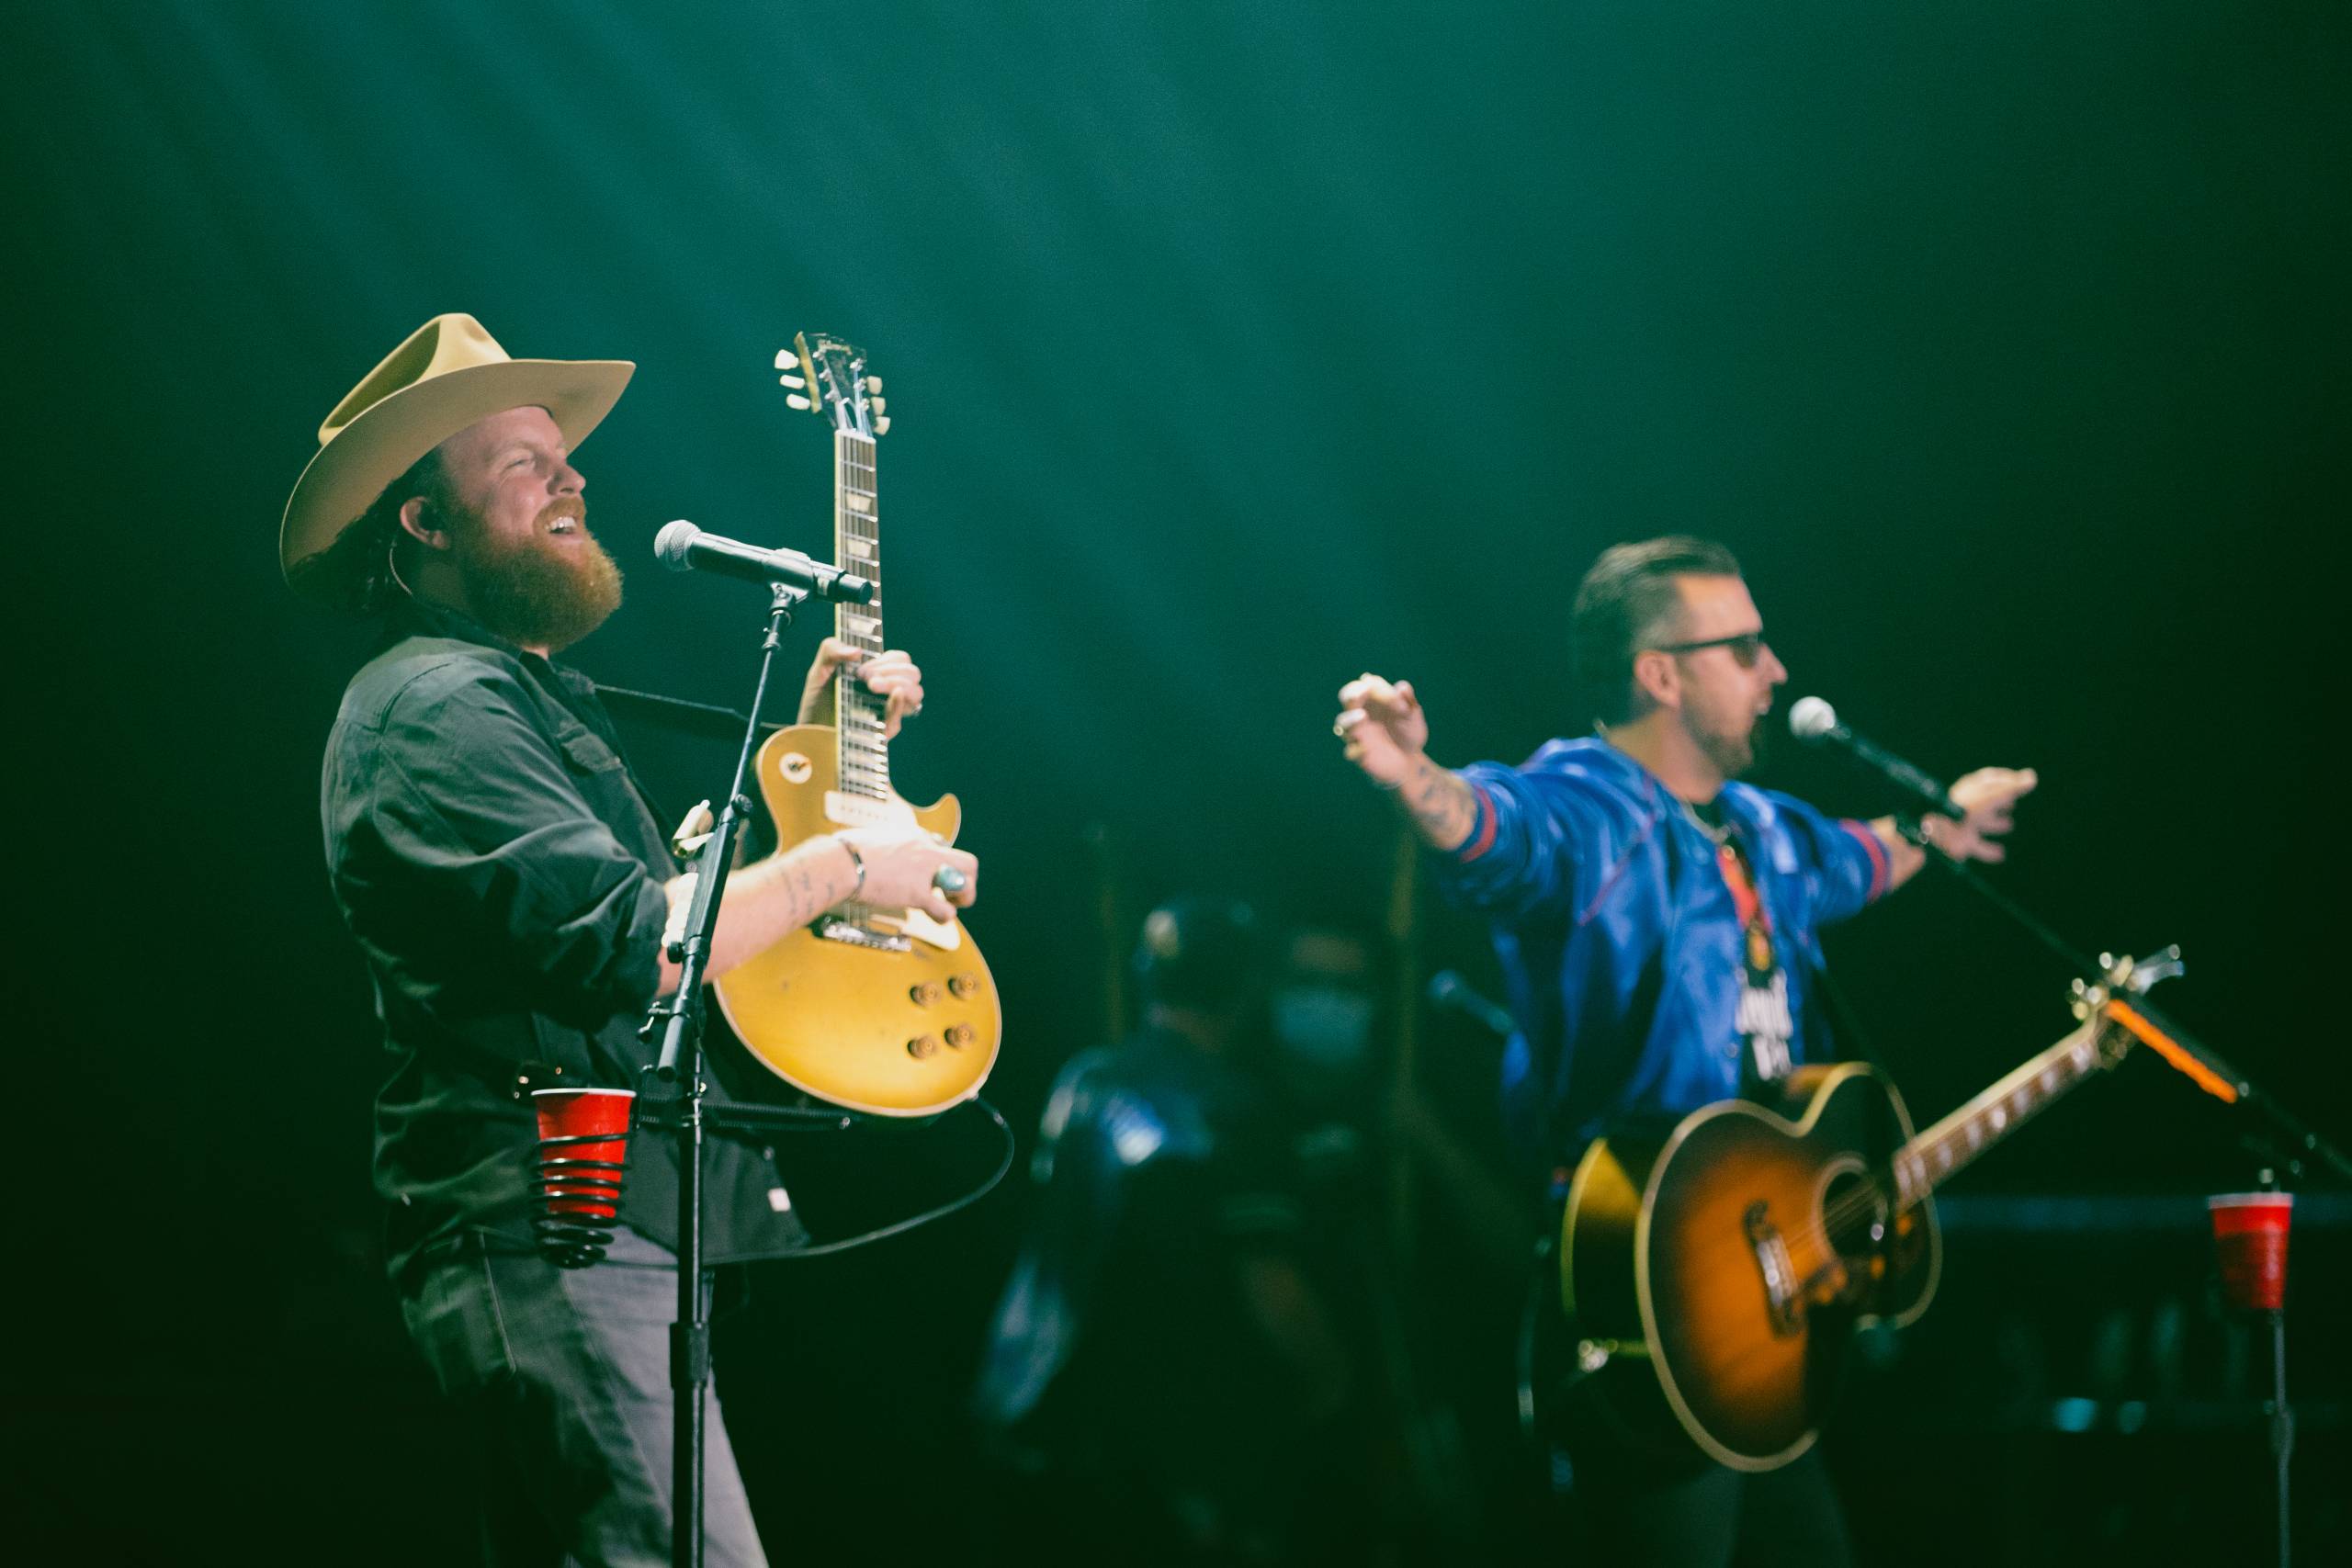 Country duo Brothers Osborne standing and performing on a stage. Both are holding acoustic guitars and singing into standing microphones.